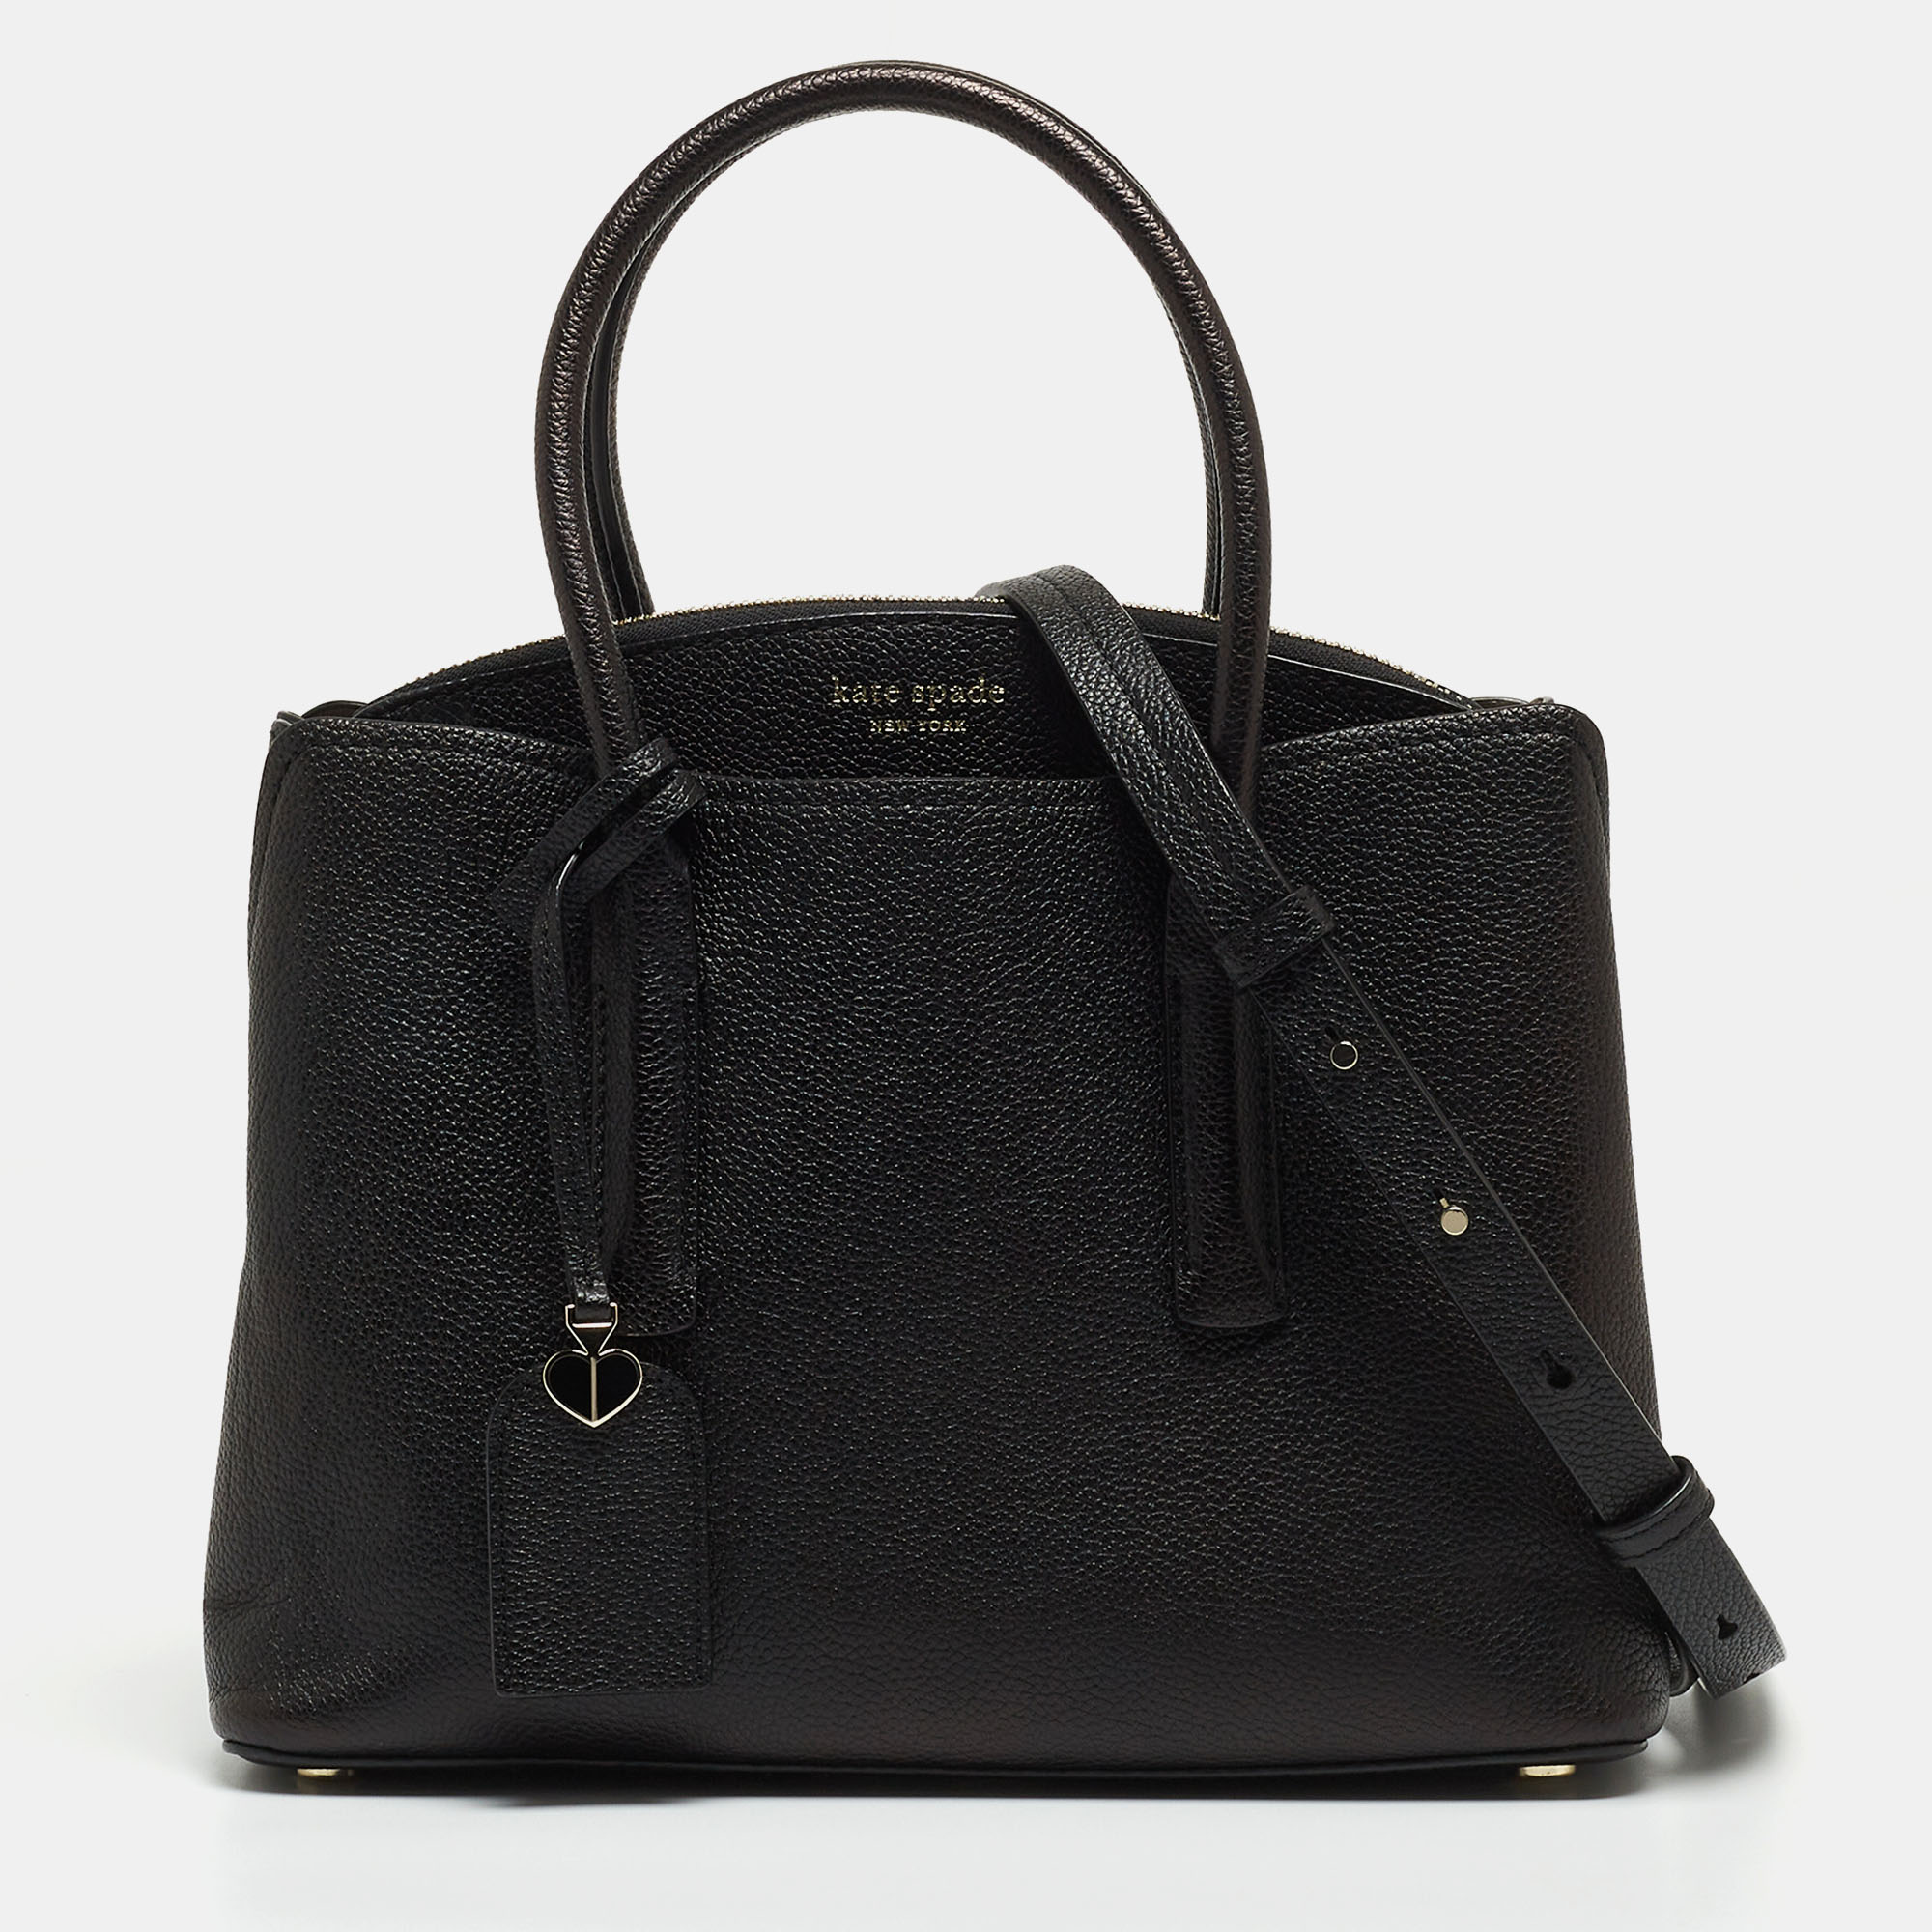 Kate Spade Black Leather Margaux Tote